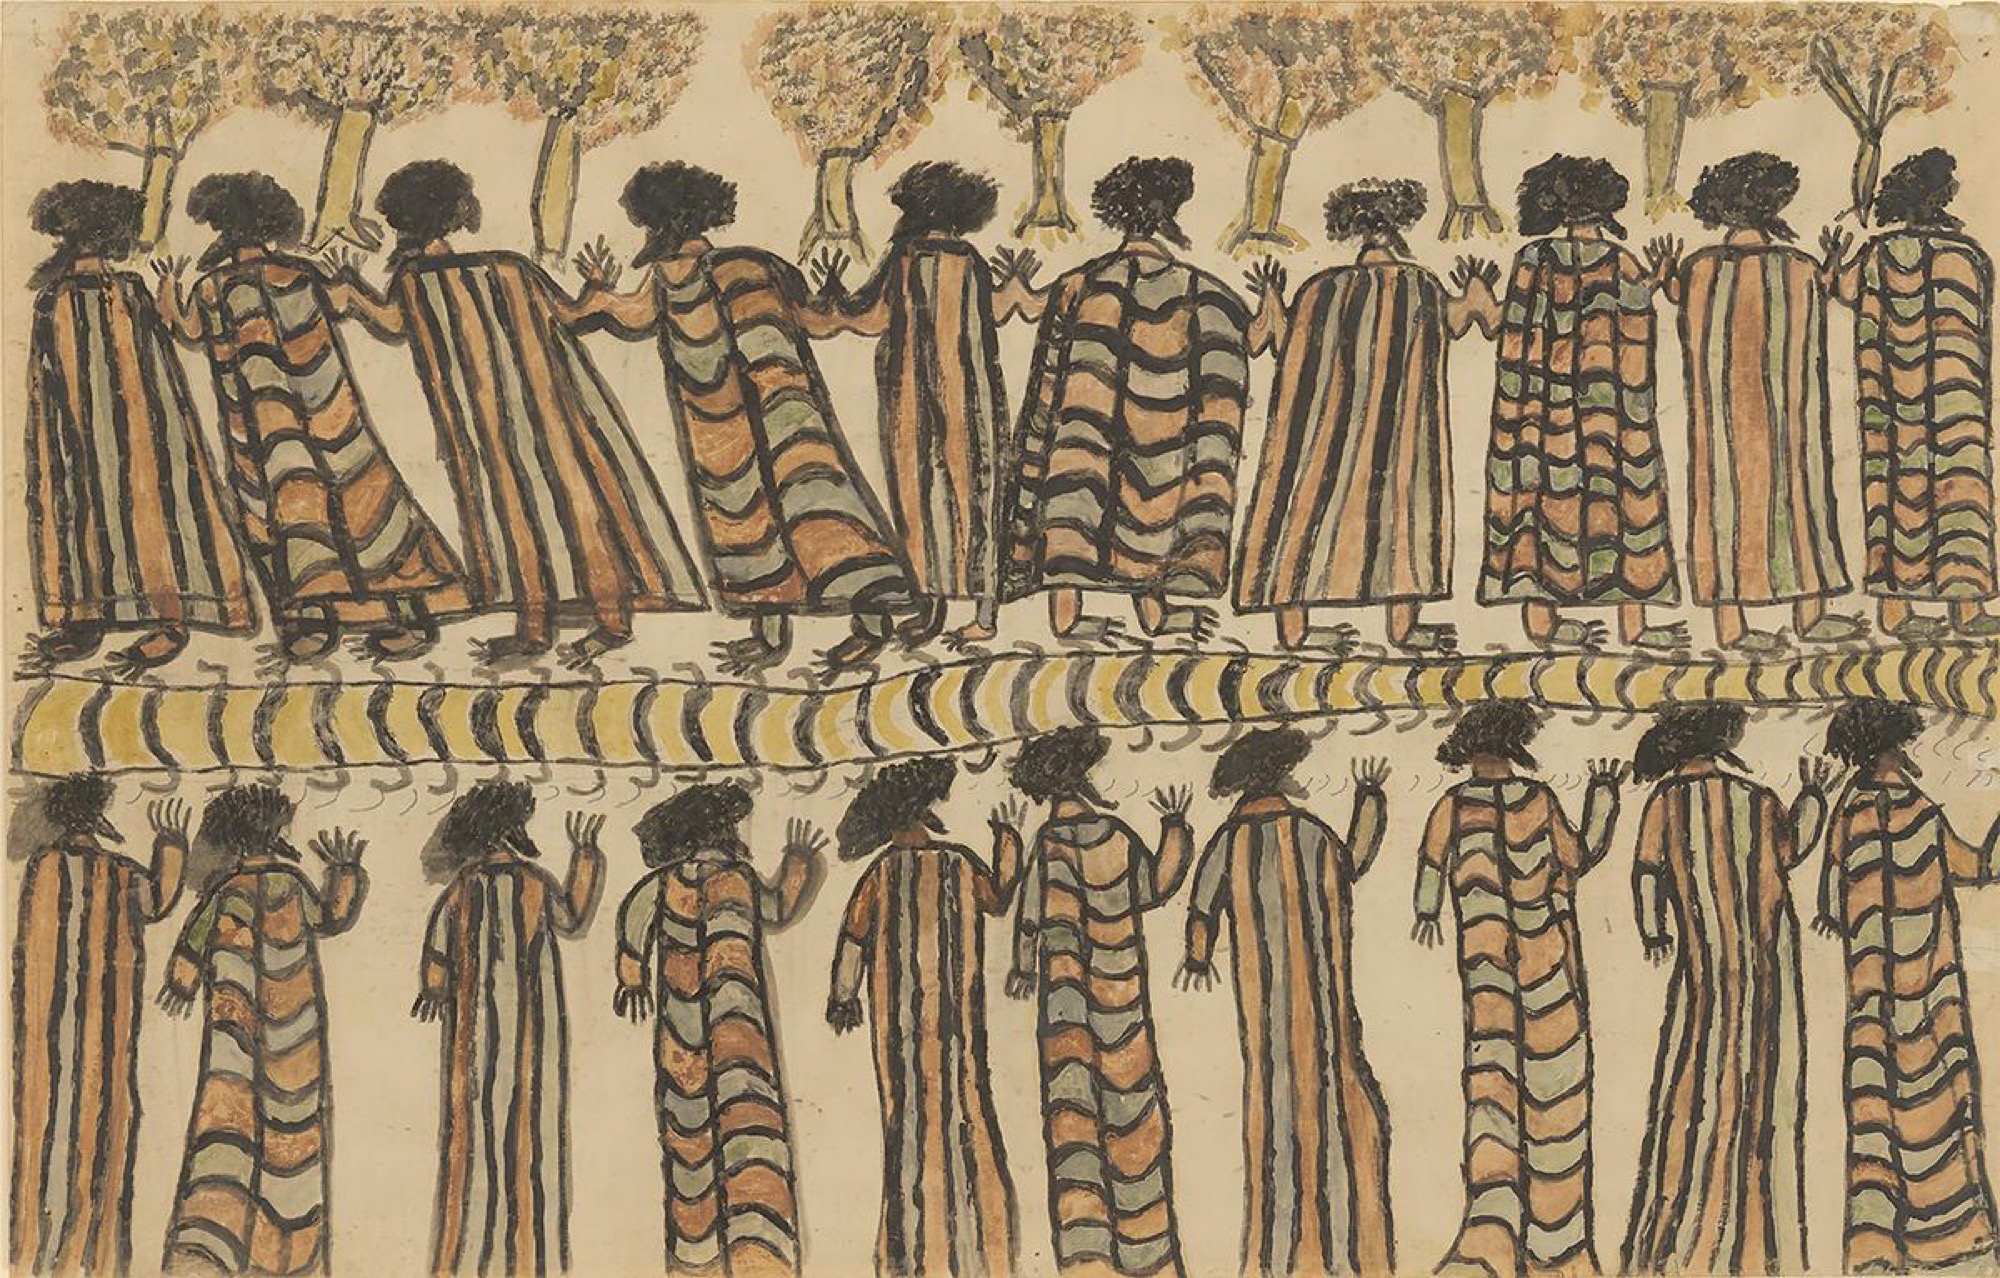 William Barak, <em>Figures in possum skin cloaks 1898</em>, pencil, wash, charcoal solution, gouache and earth pigments on paper, 57.0 x 88.8 cm (image and sheet), National Gallery of Victoria, Melbourne, Purchased, 1962, 1215A-5.